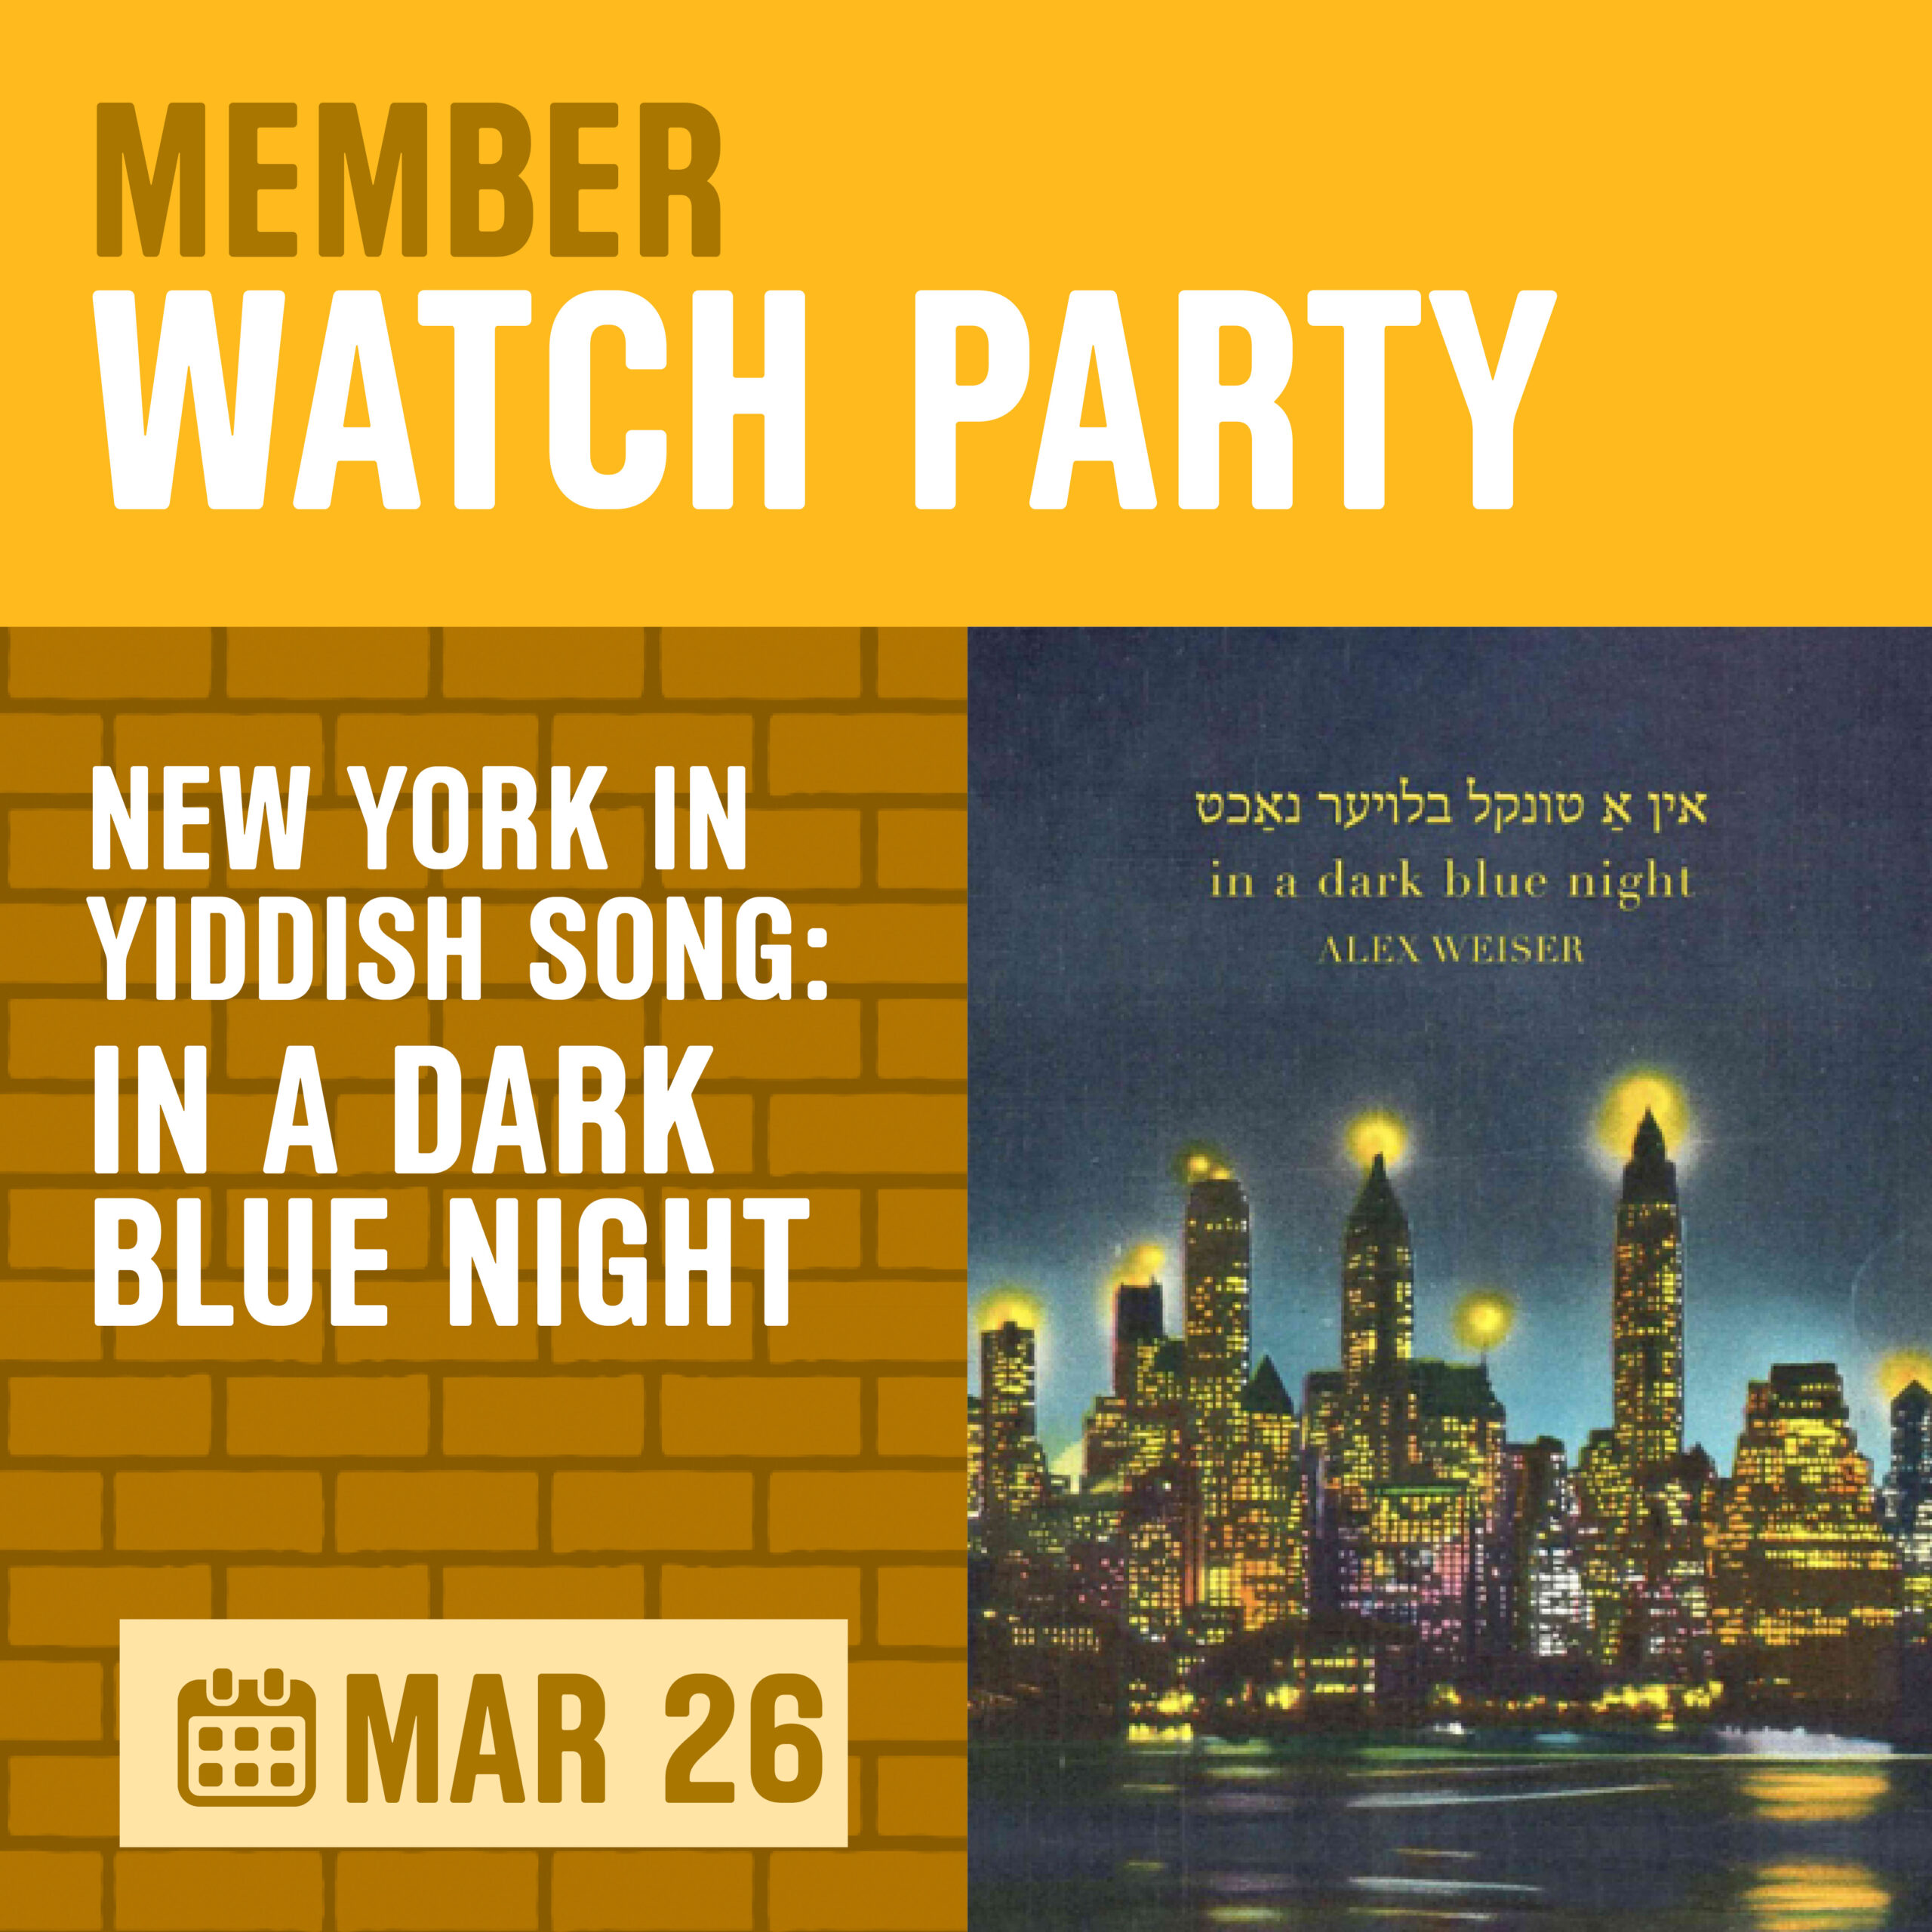 Member Watch Party: New York in Yiddish Song: In a Dark Blue Night